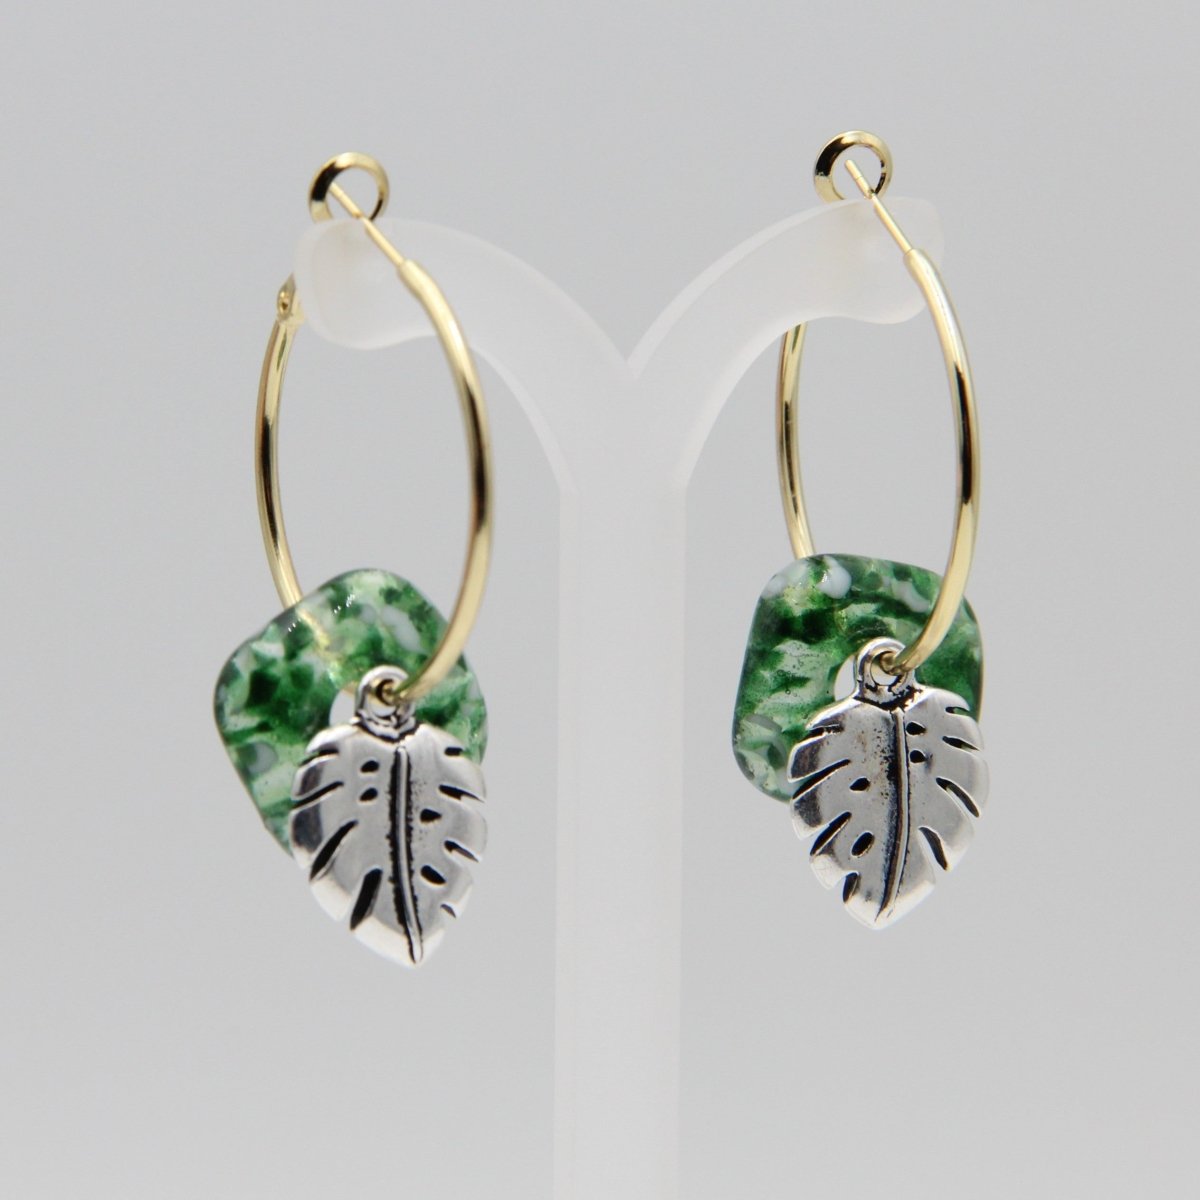 Gold Hoop Earrings with Green Glass Donuts and Monstera Leaf Charms